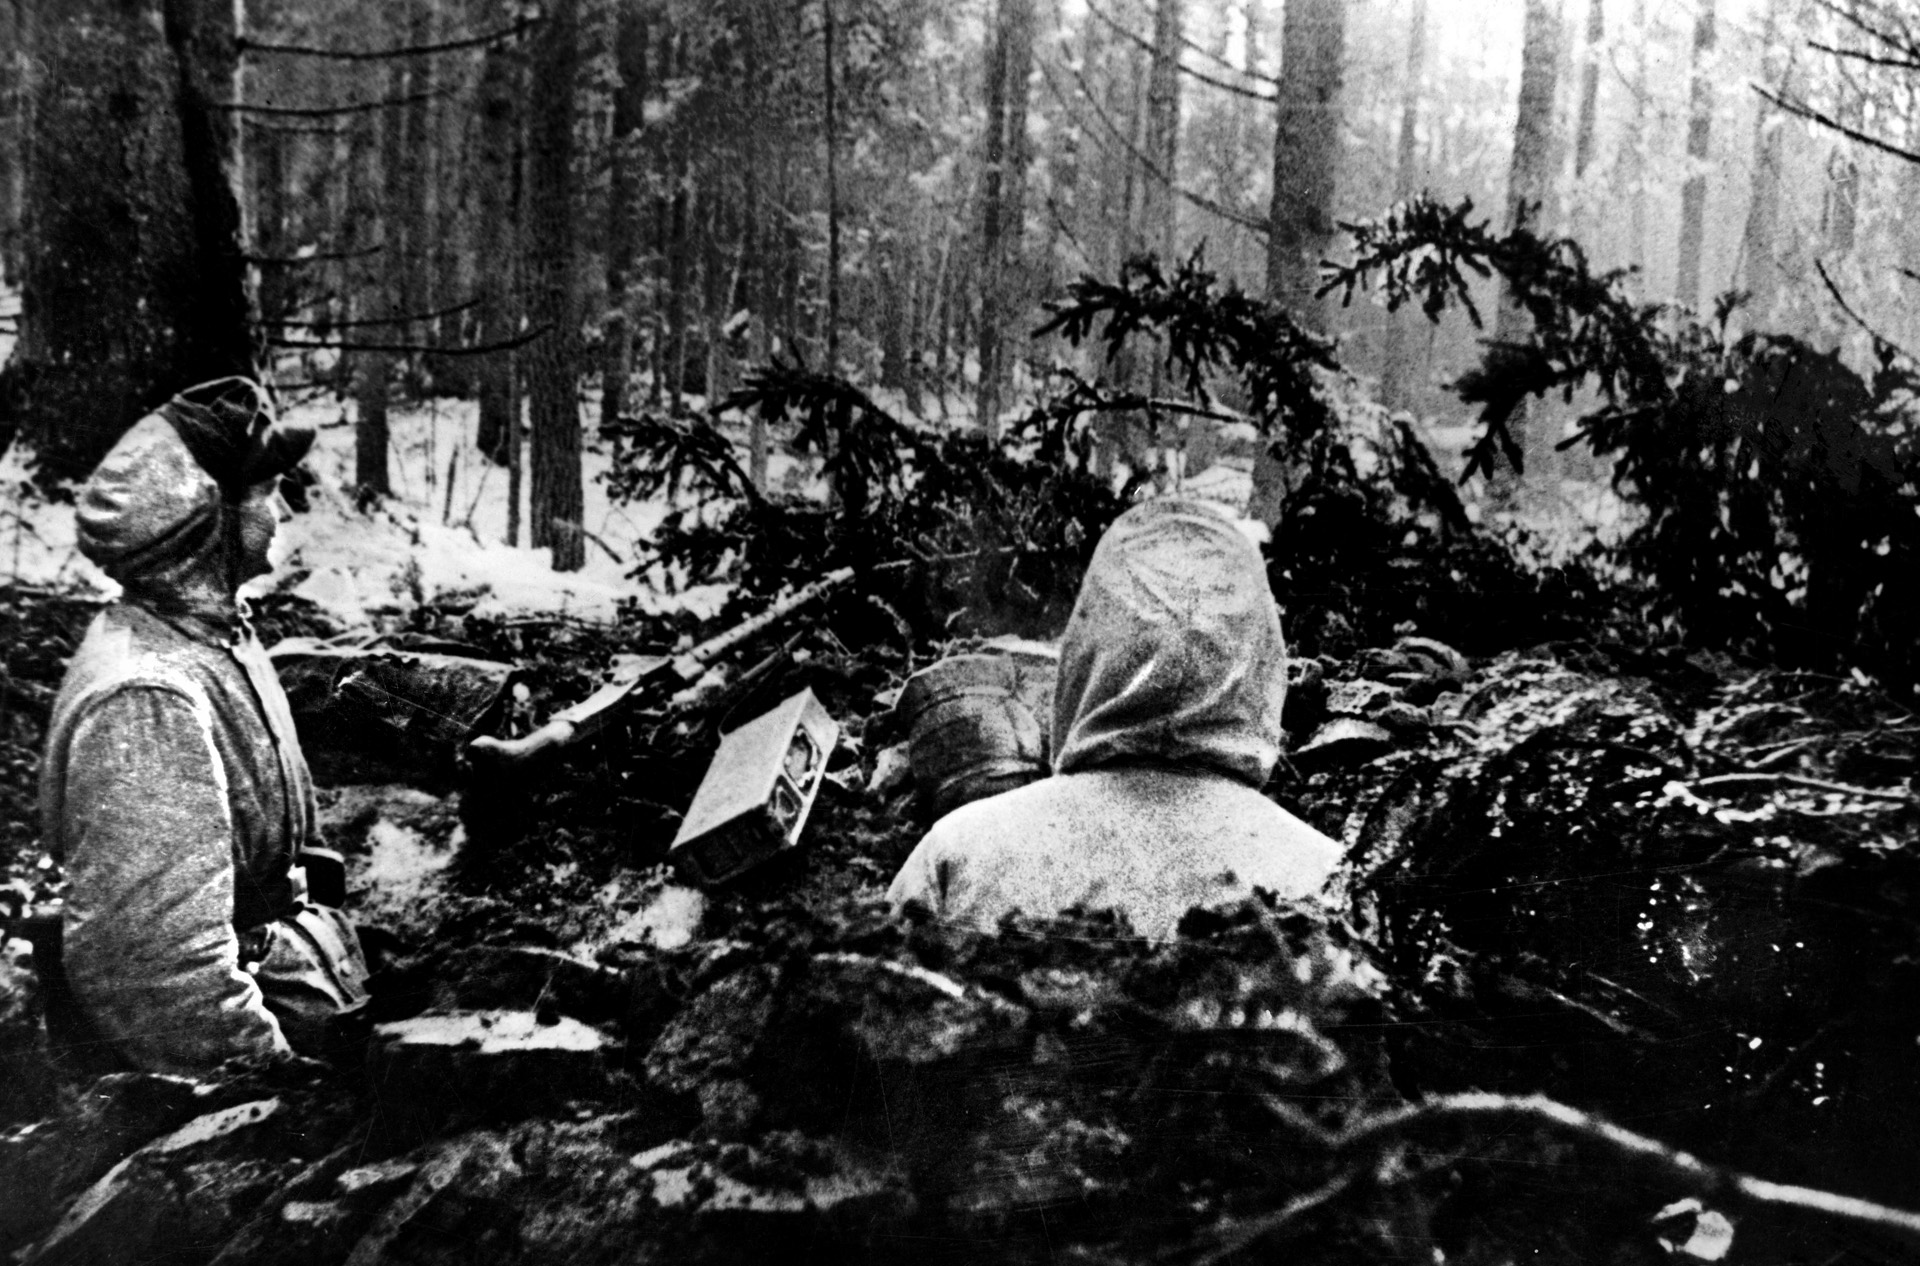 German soldiers man an MG-34 machine gun in the swiftly collapsing Courland Pocket, March 24, 1945. With defeat only weeks away, Grand Admiral Karl Dönitz did his best to evacuate civilians and soldiers from the area while disobeying Hitler’s orders to hold fast.